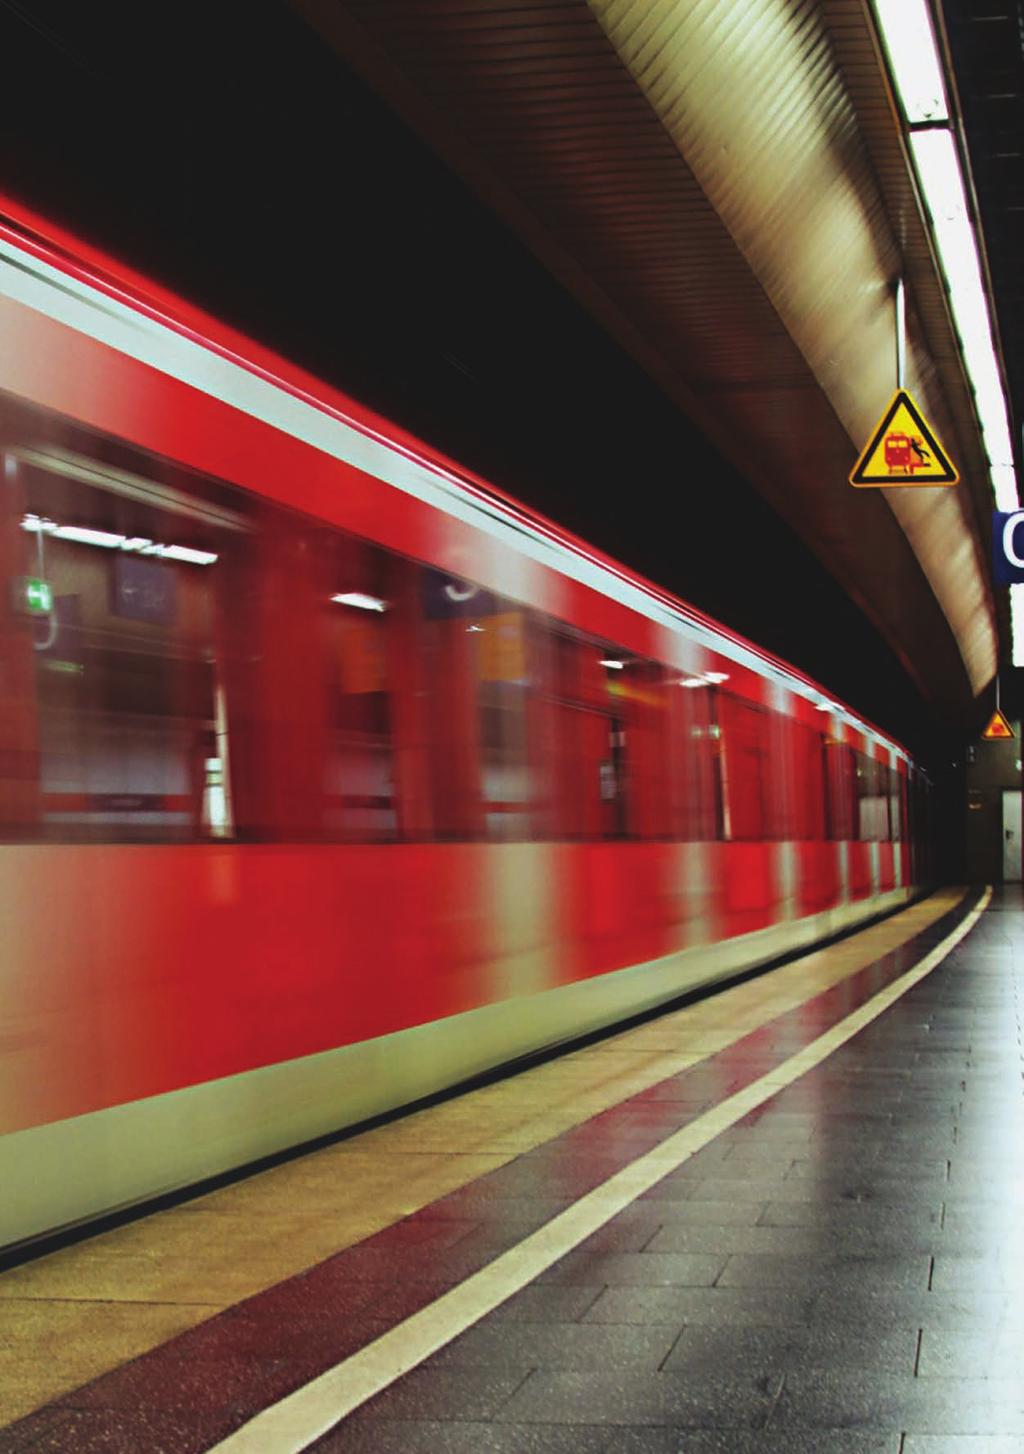 Mass transit systems, airports, subways, city buses, and train stations are all face threats, such as: petty crime, harassement, liability suits and vandalism.